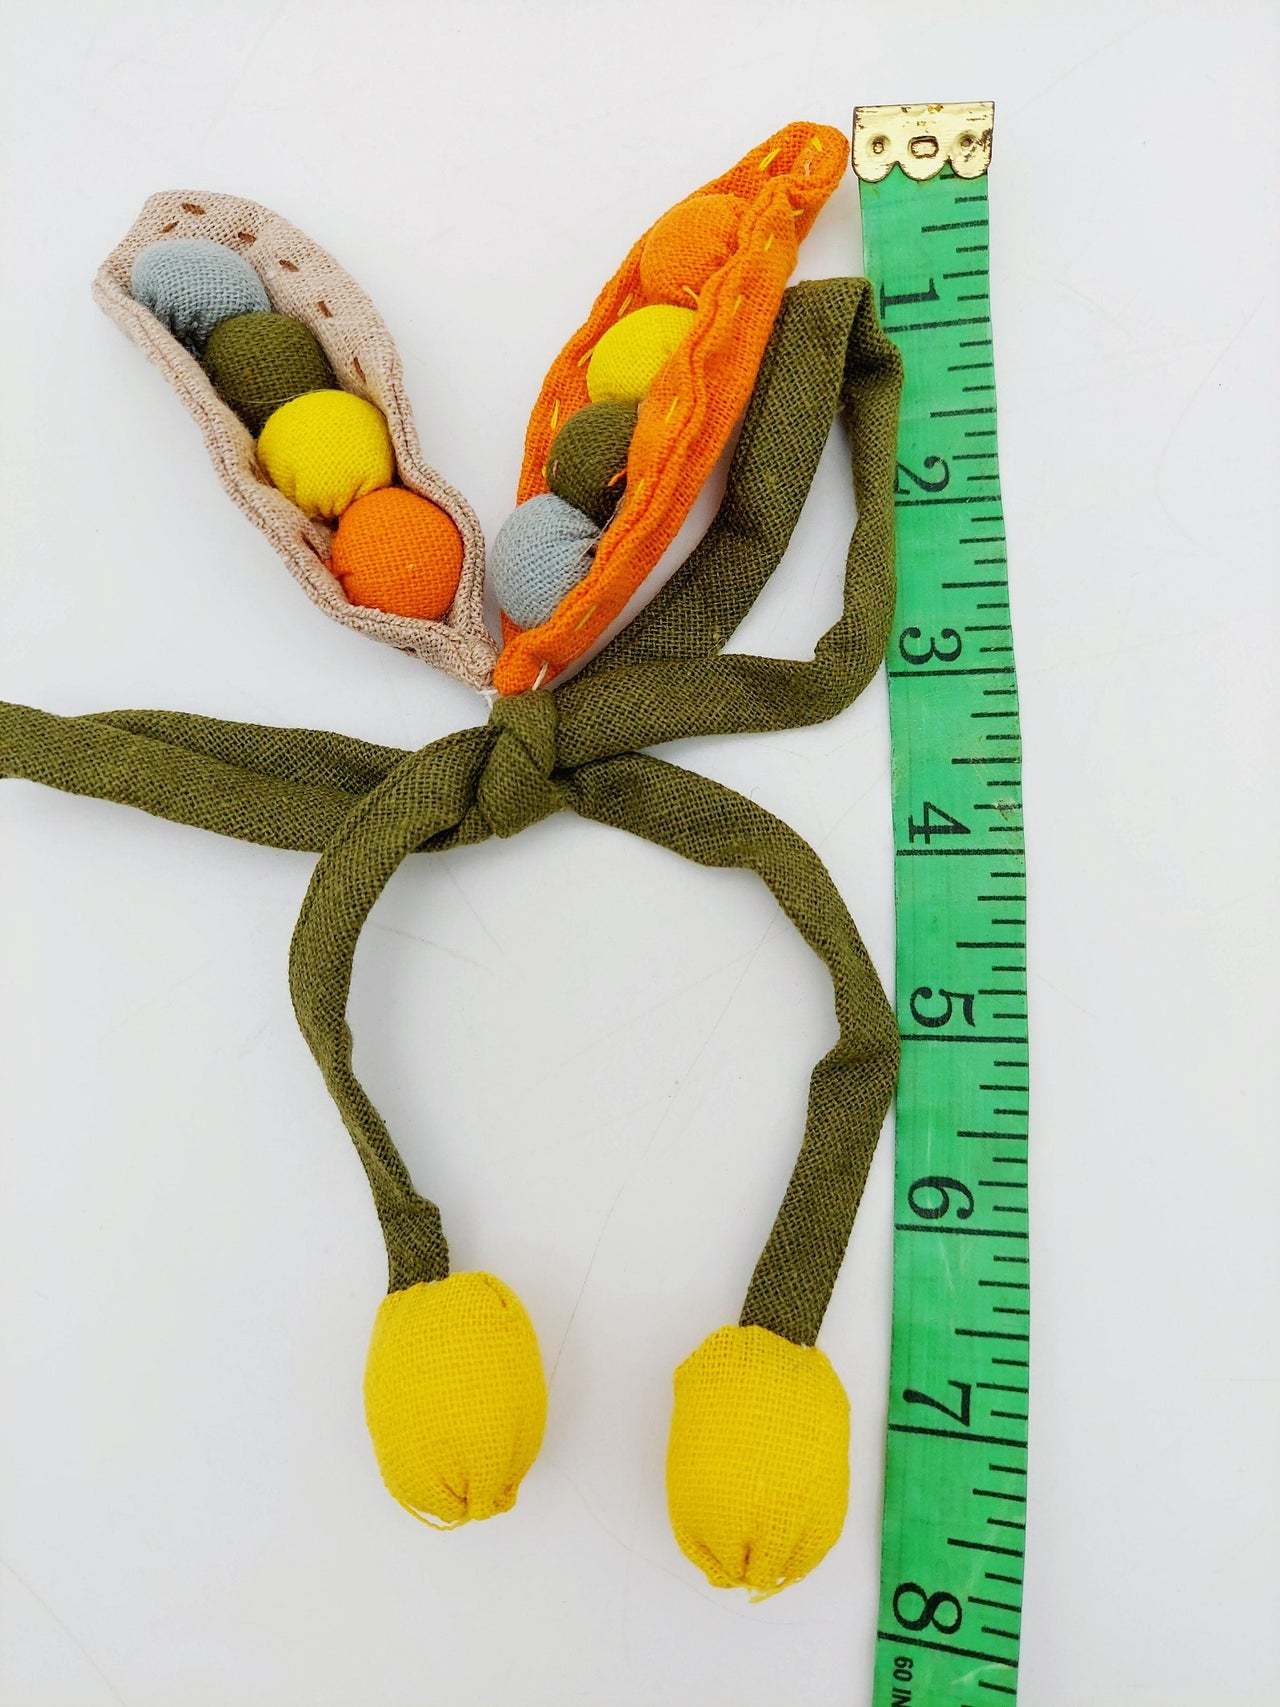 Hand Embroidered Peas in a Pod Applique, Peach Embroidery, Seed Pod Applique